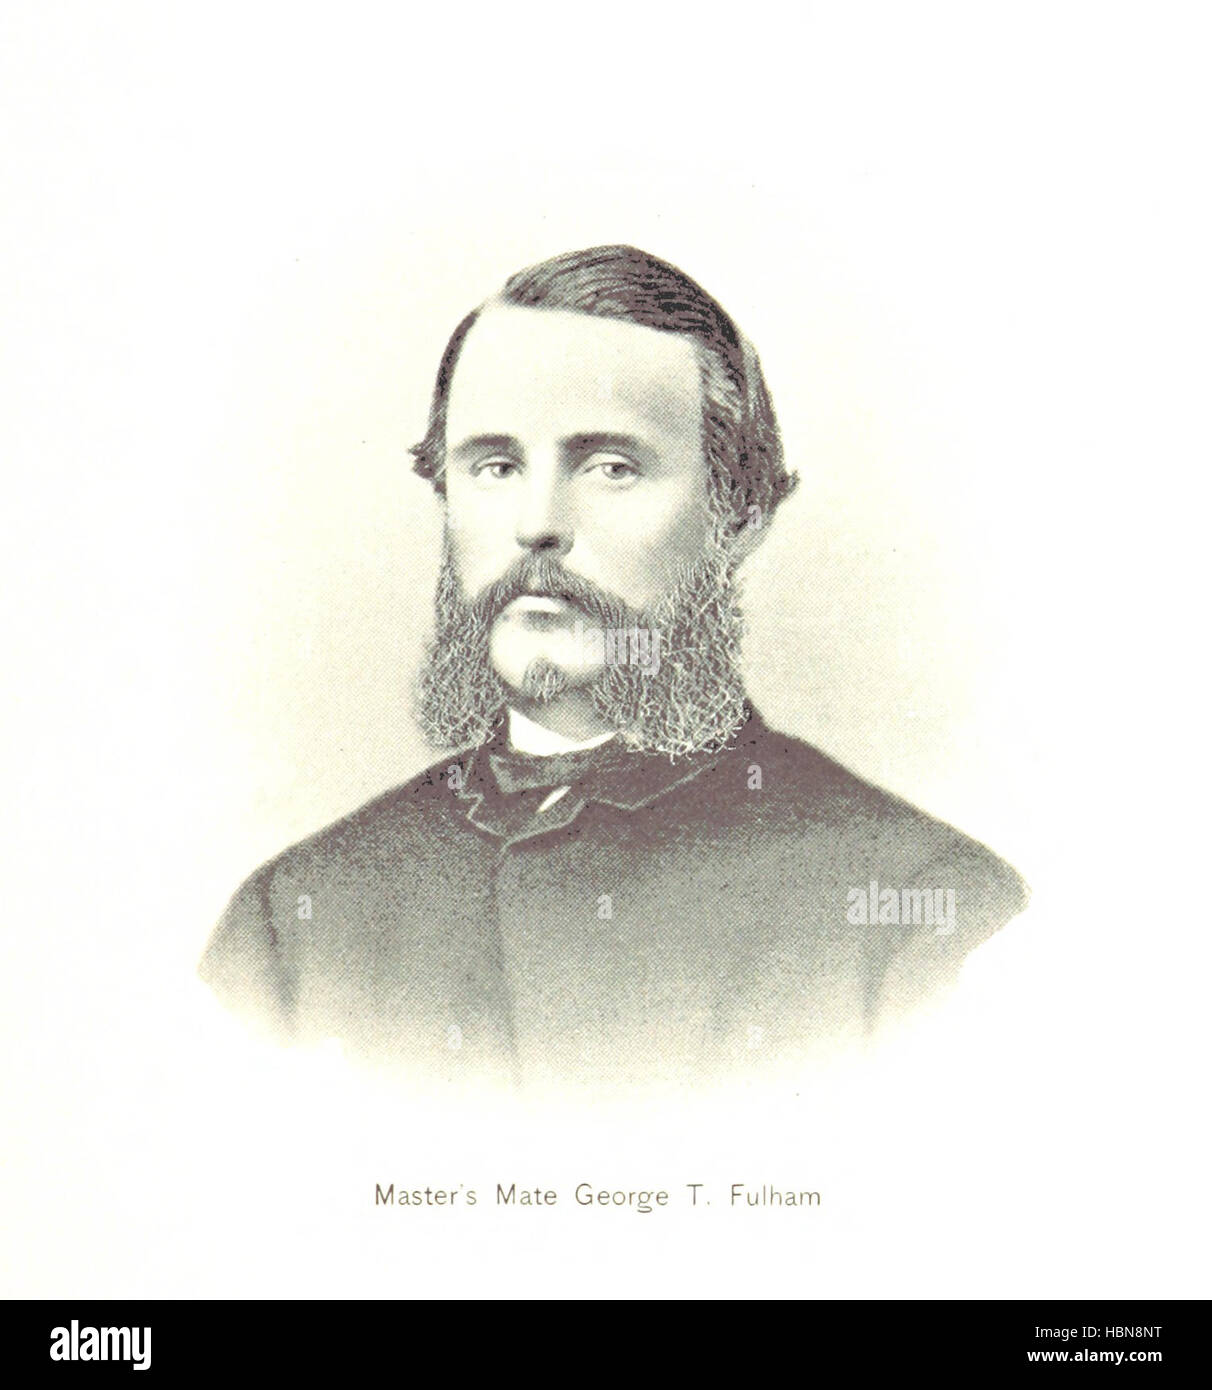 Image taken from page 261 of 'Two Years on the Alabama ... Second edition' Image taken from page 261 of 'Two Years on the Stock Photo